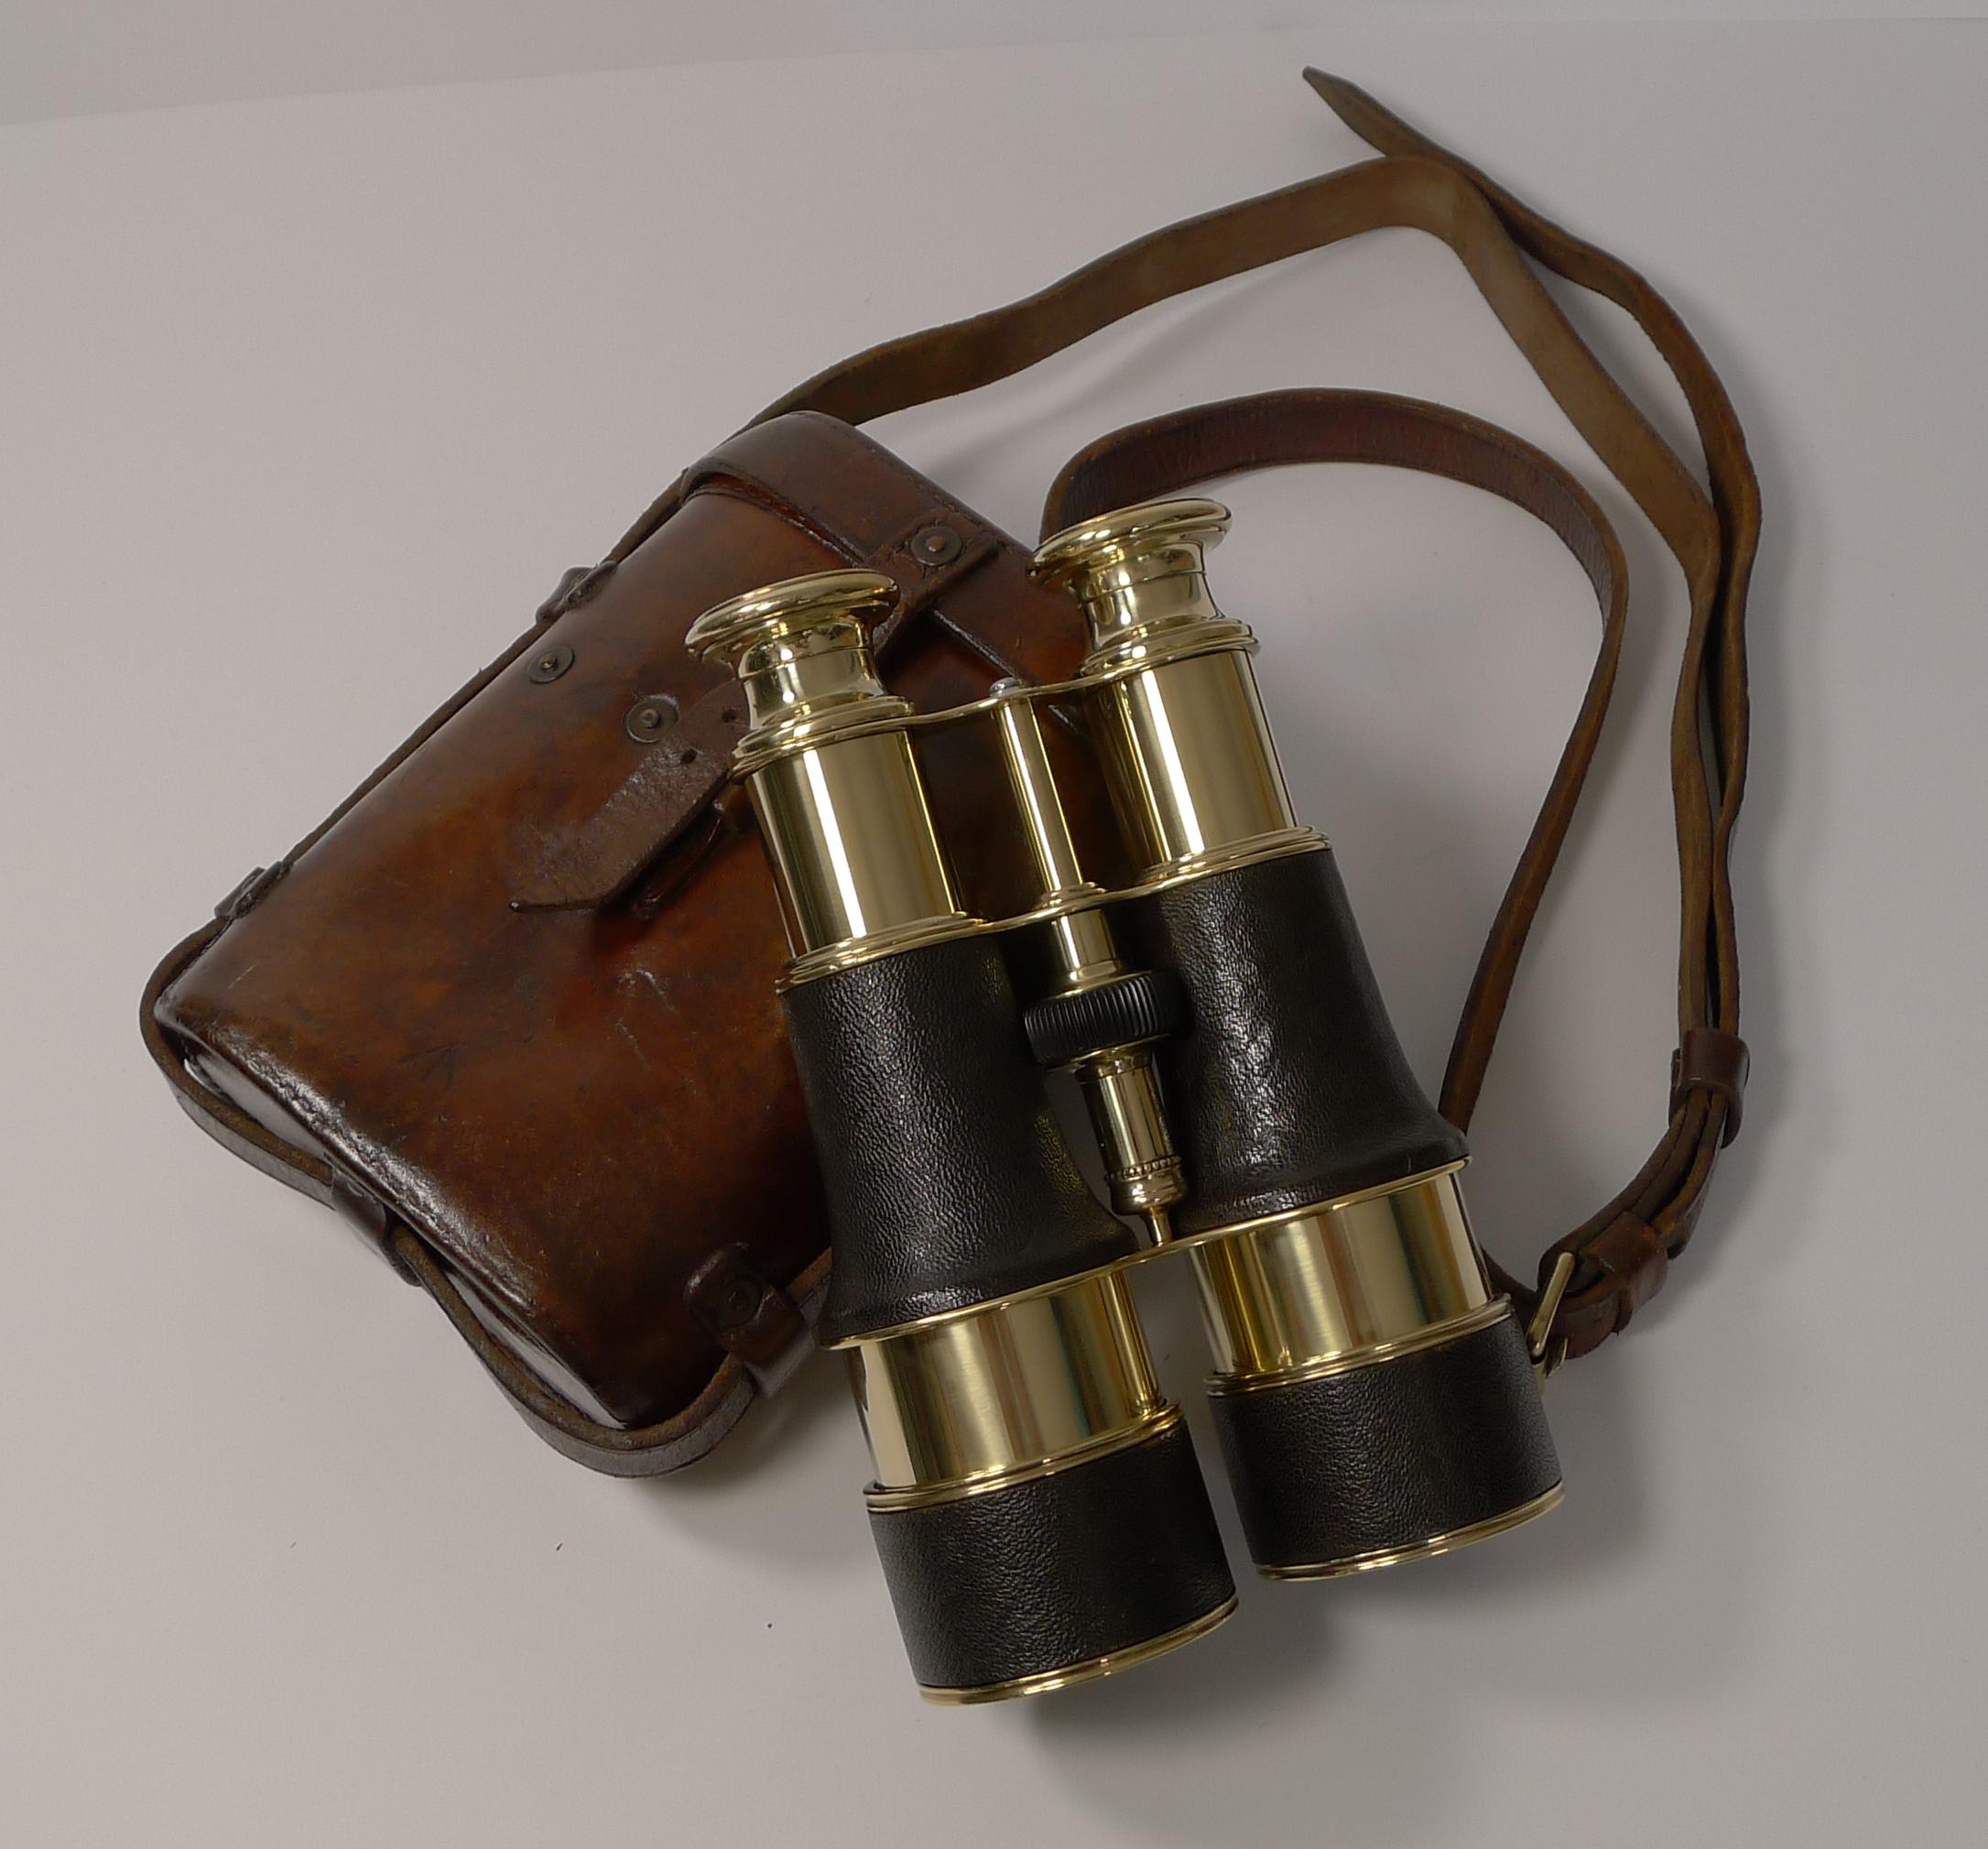 Pair of WW1 Binoculars and Case, British Officer's Issue, 1917, LeMaire, Paris 4